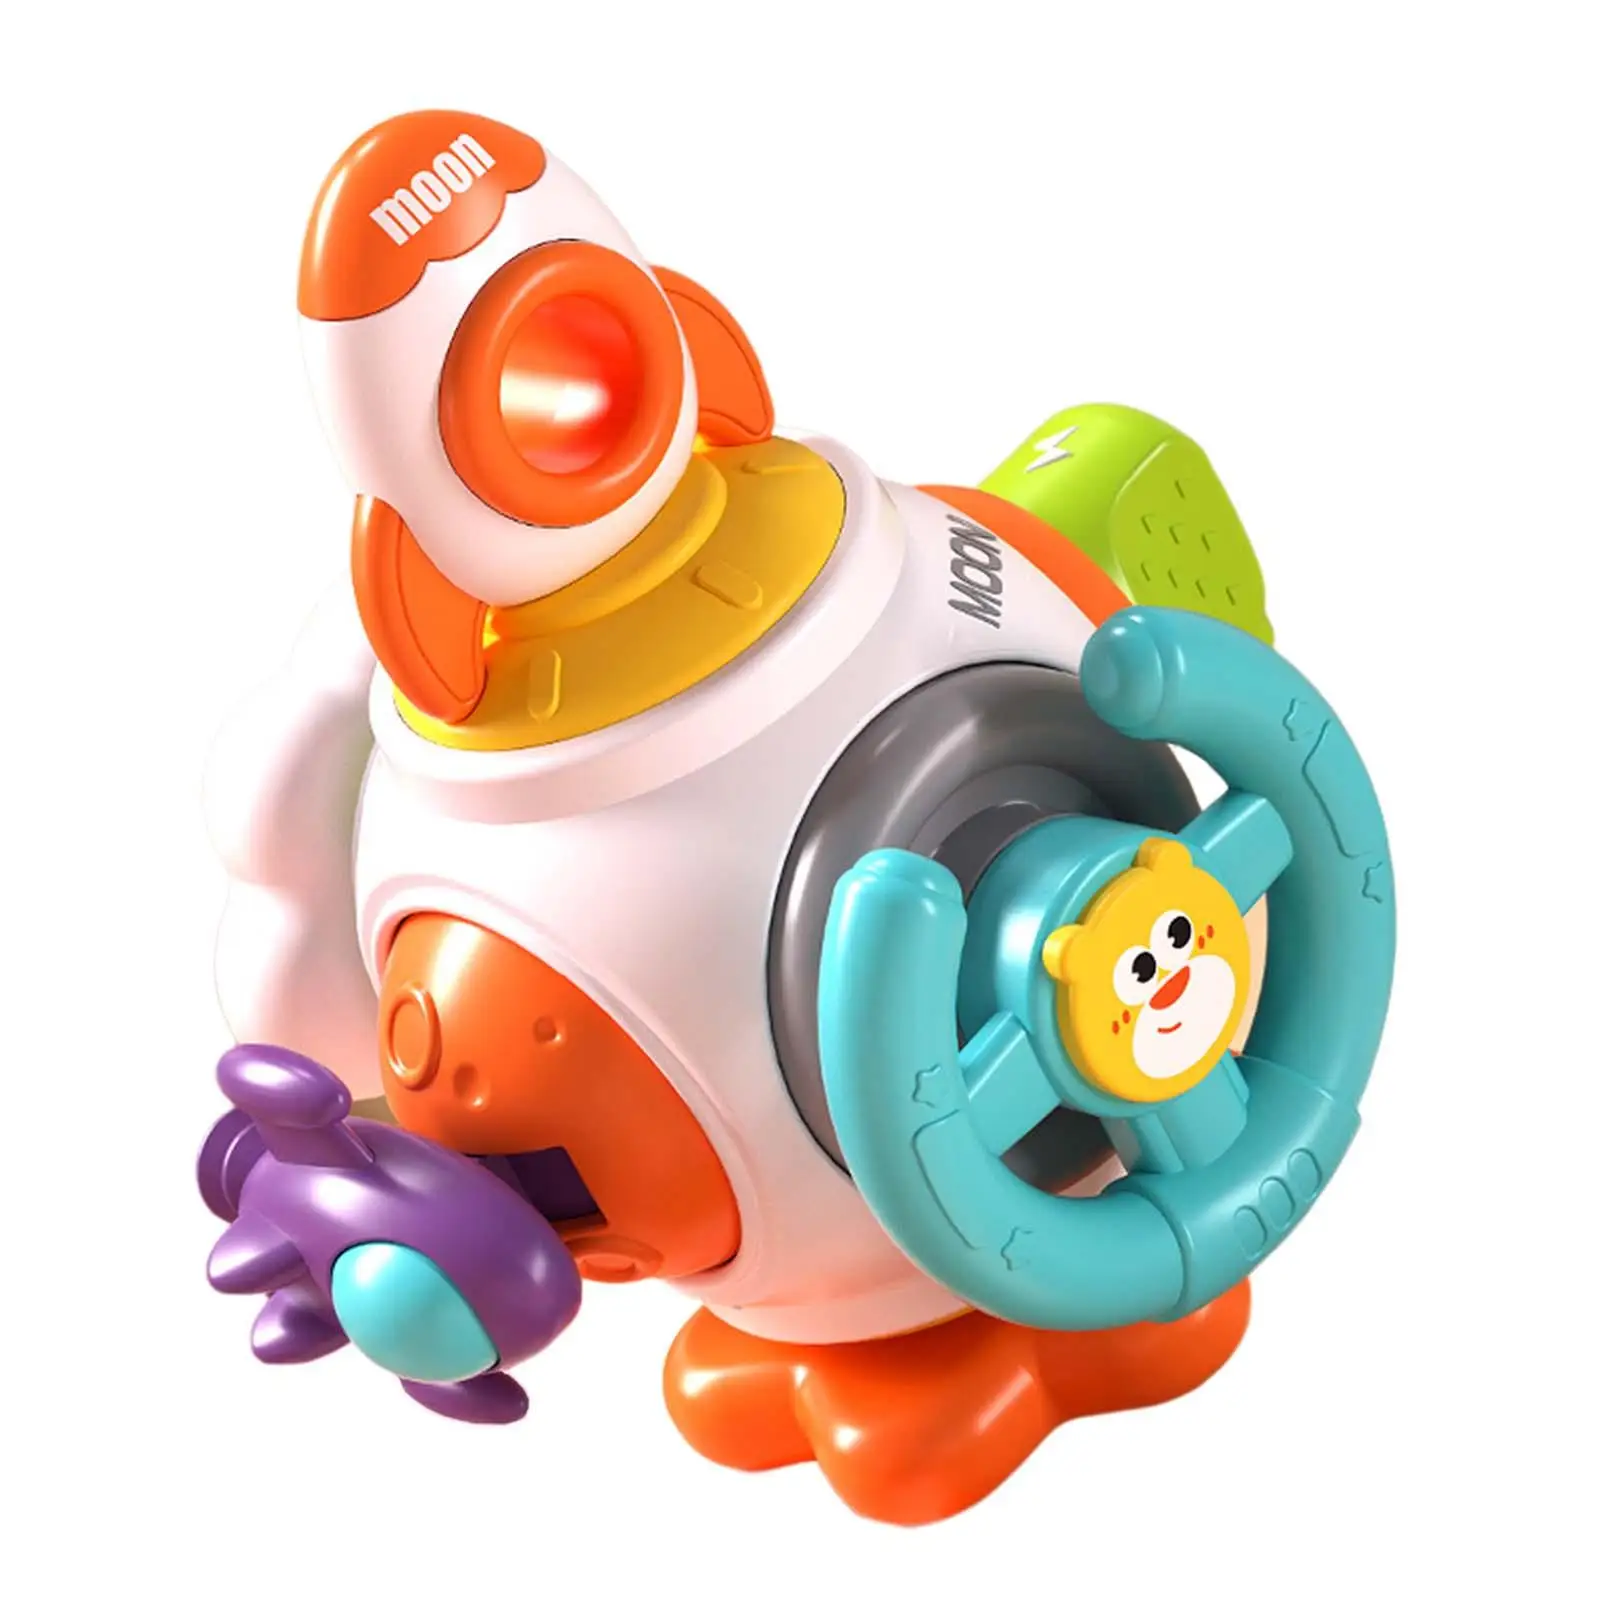 Baby Busy Ball Portable Learning Toys Developmental Toys Hand Grasping Ball for Color Recognition Early Developmental Kids Baby